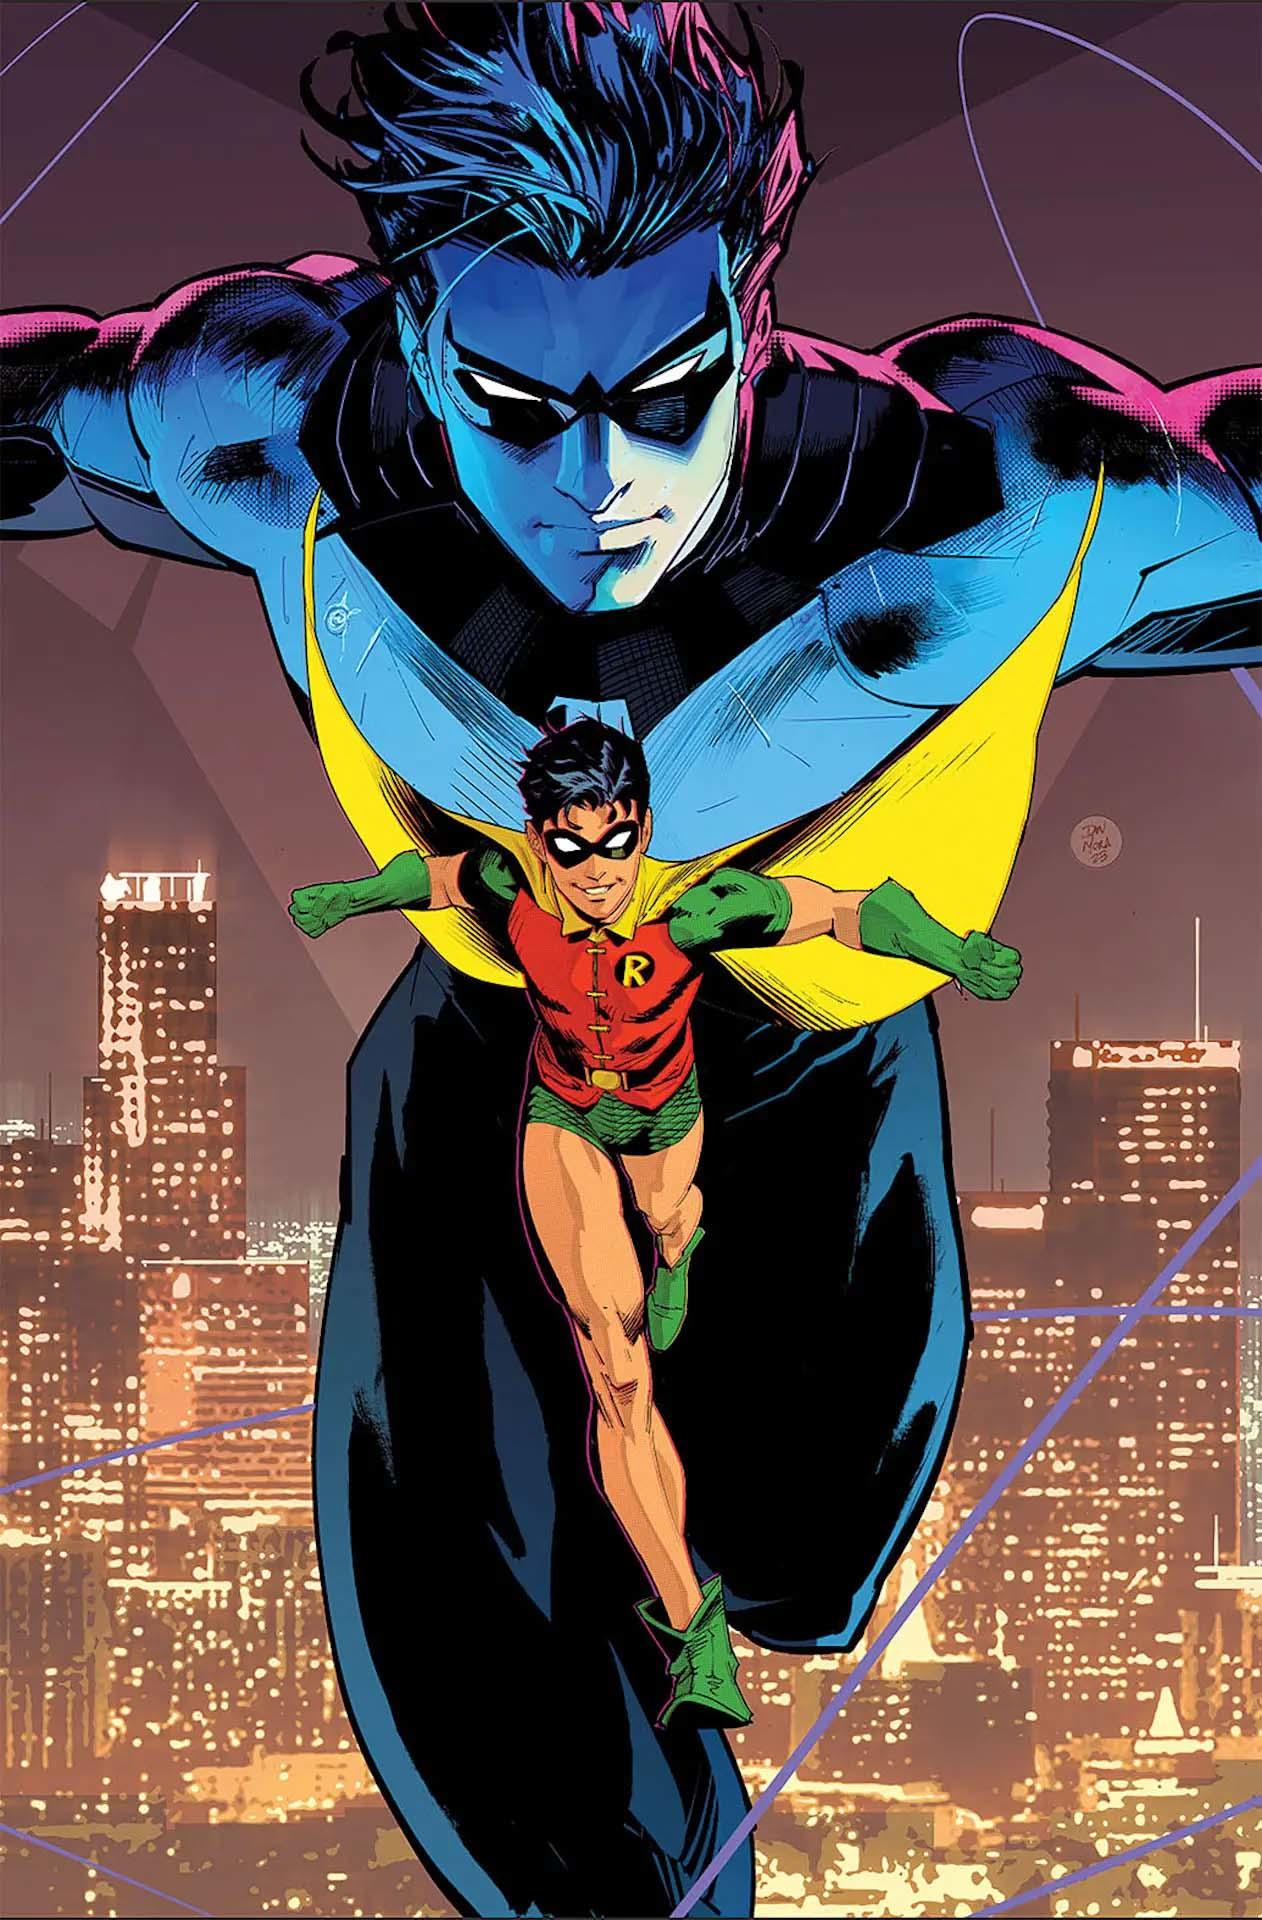 Ric Grayson is Back to Haunt Nightwing